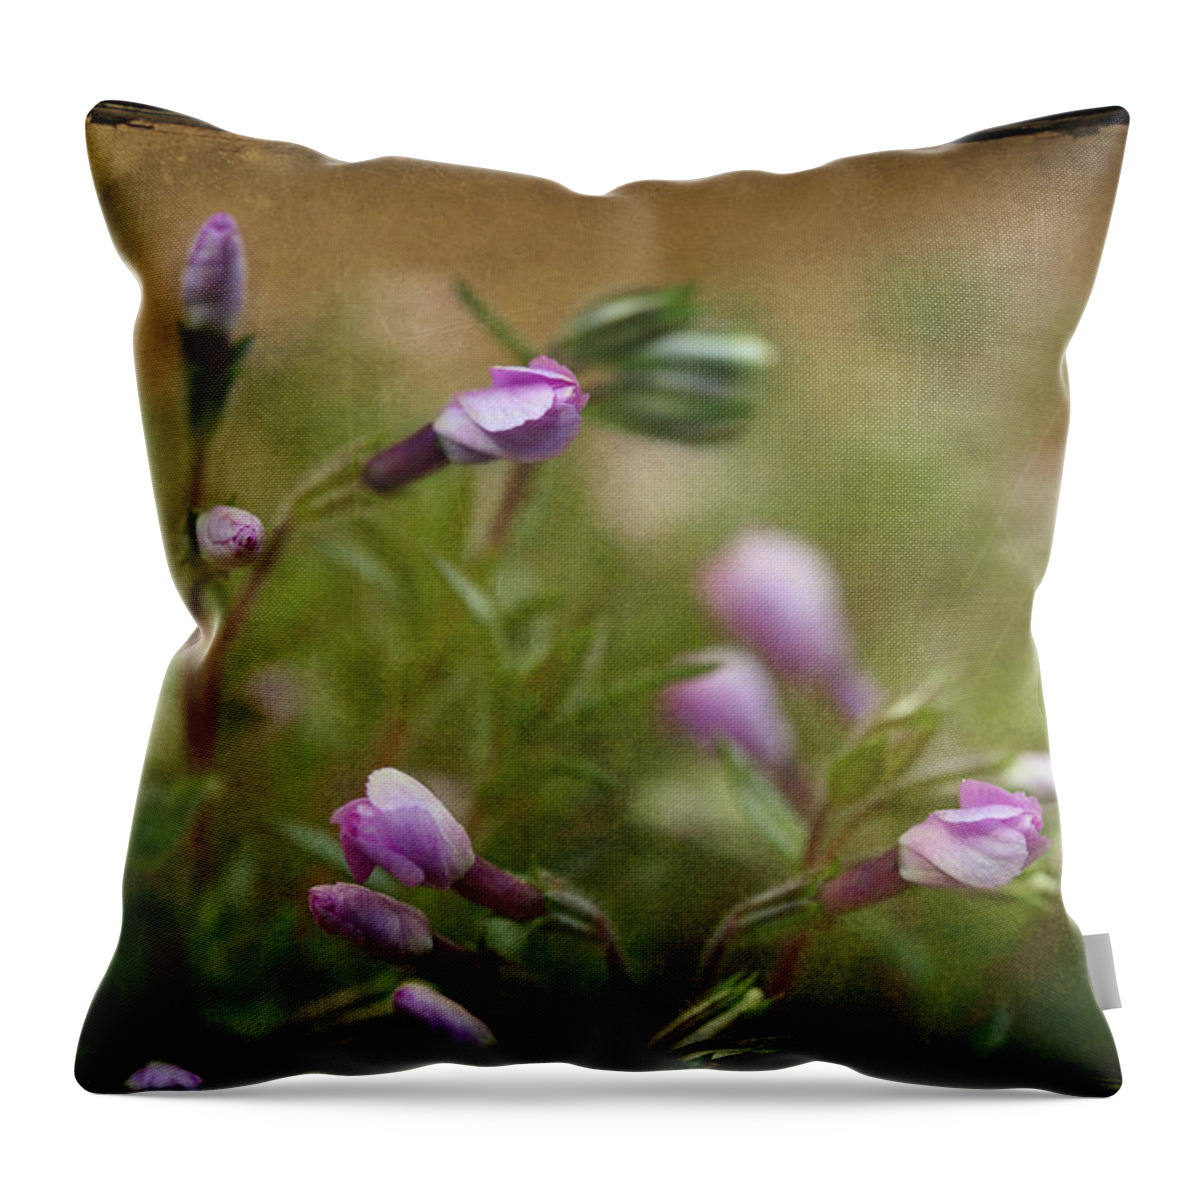 Pink Flowers Throw Pillow featuring the photograph Into The Garden by Michael Eingle